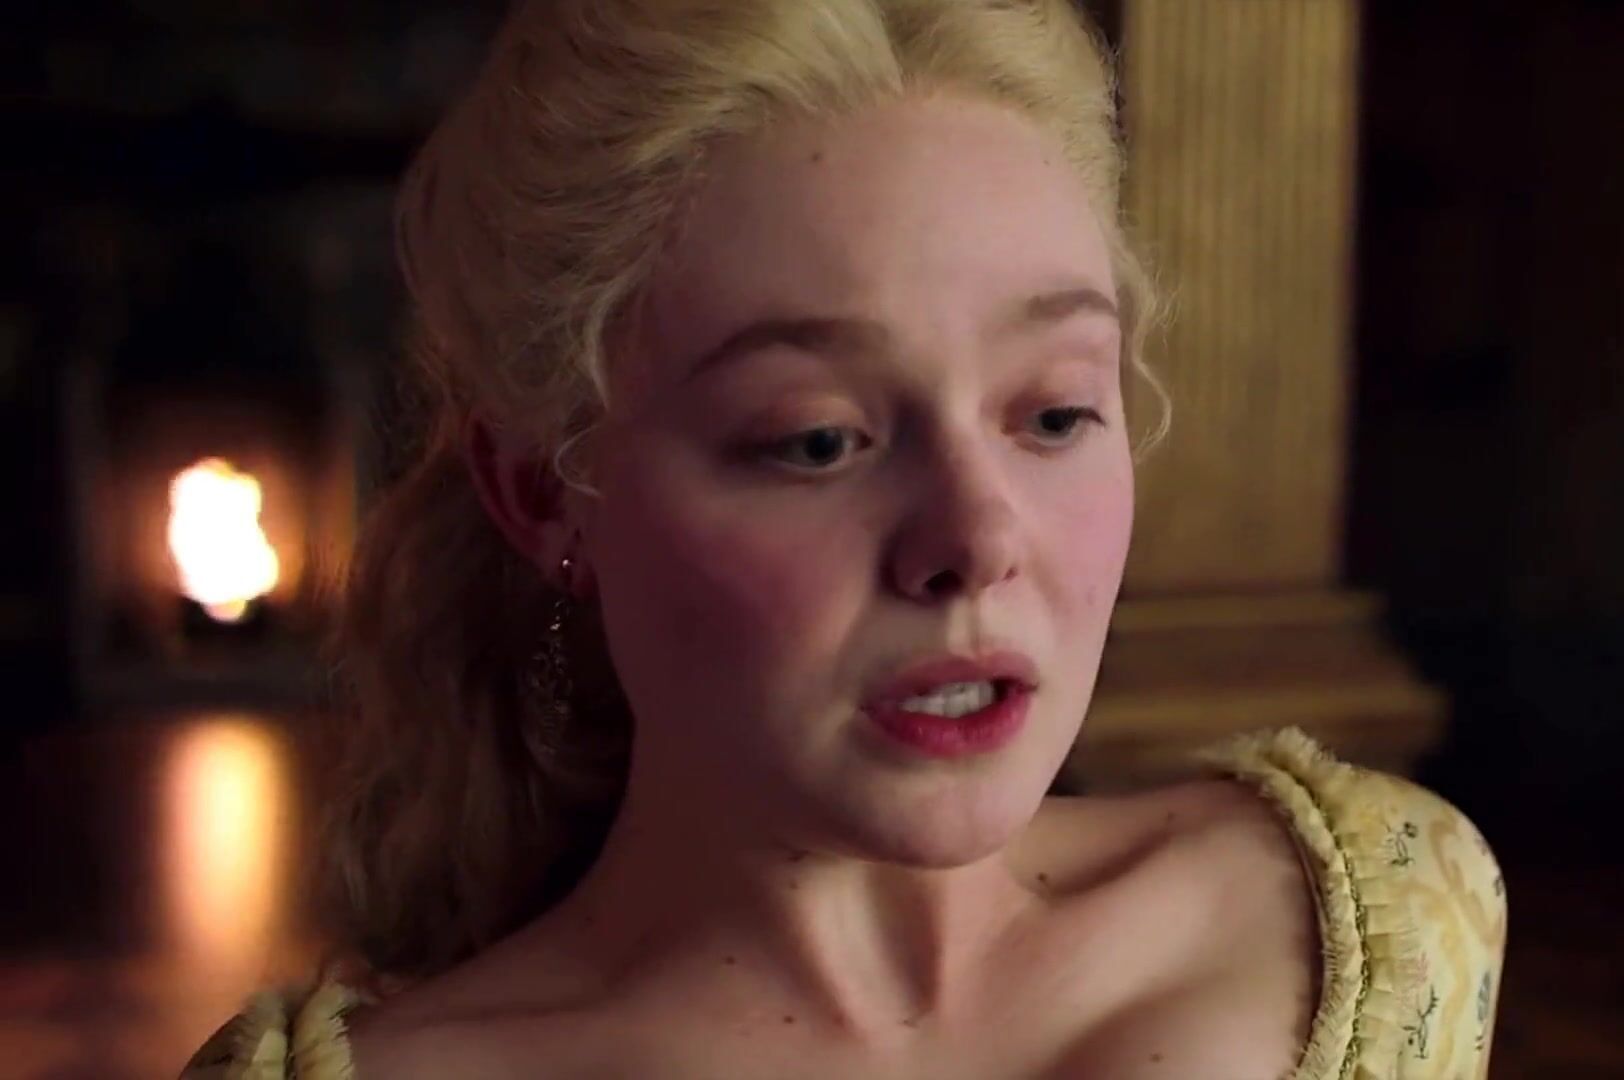 Hooker Sexy Elle Fanning loves getting it on in oral and vaginal ways in the TV series The Great Pene